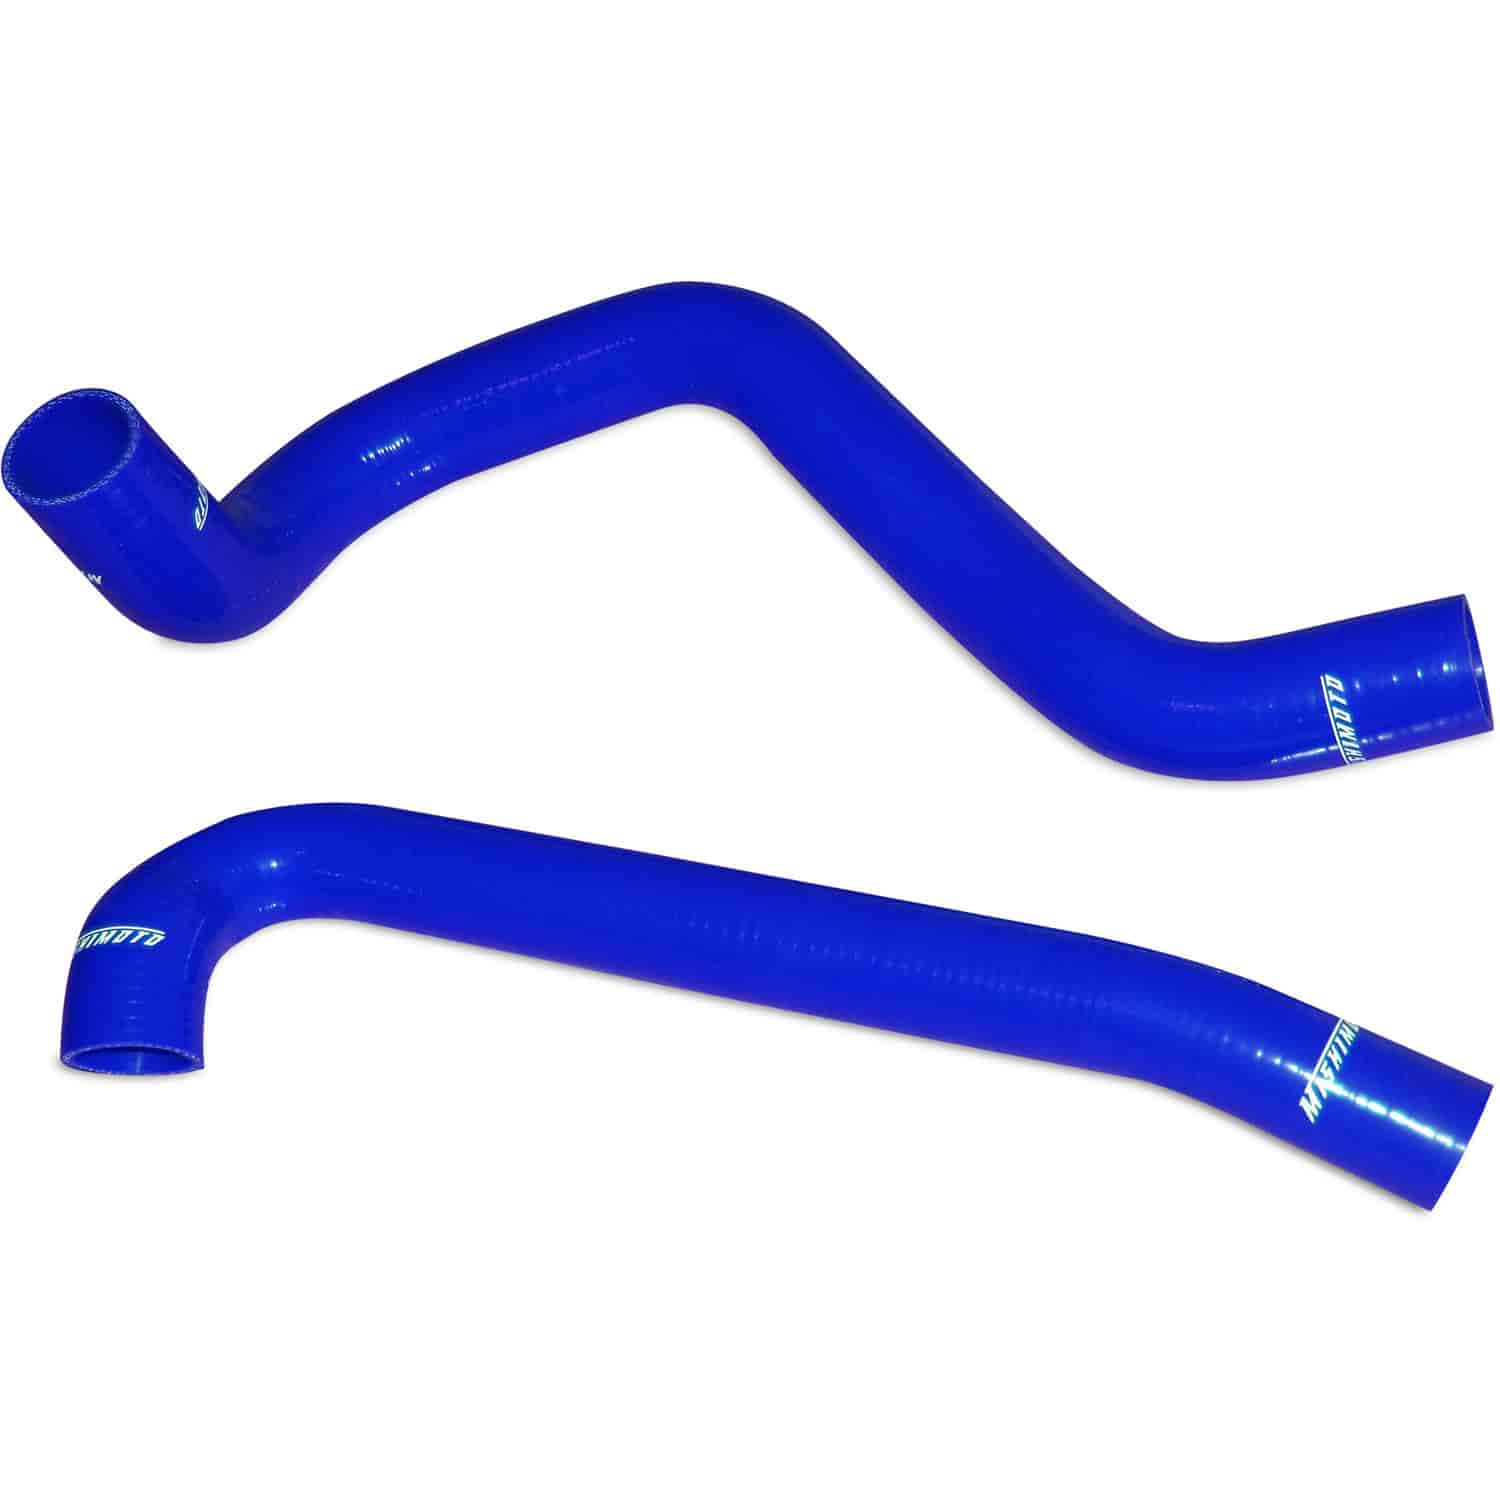 Jeep Wrangler 4 Cyl Silicone Hose Kit - MFG Part No. MMHOSE-WR4-97BL